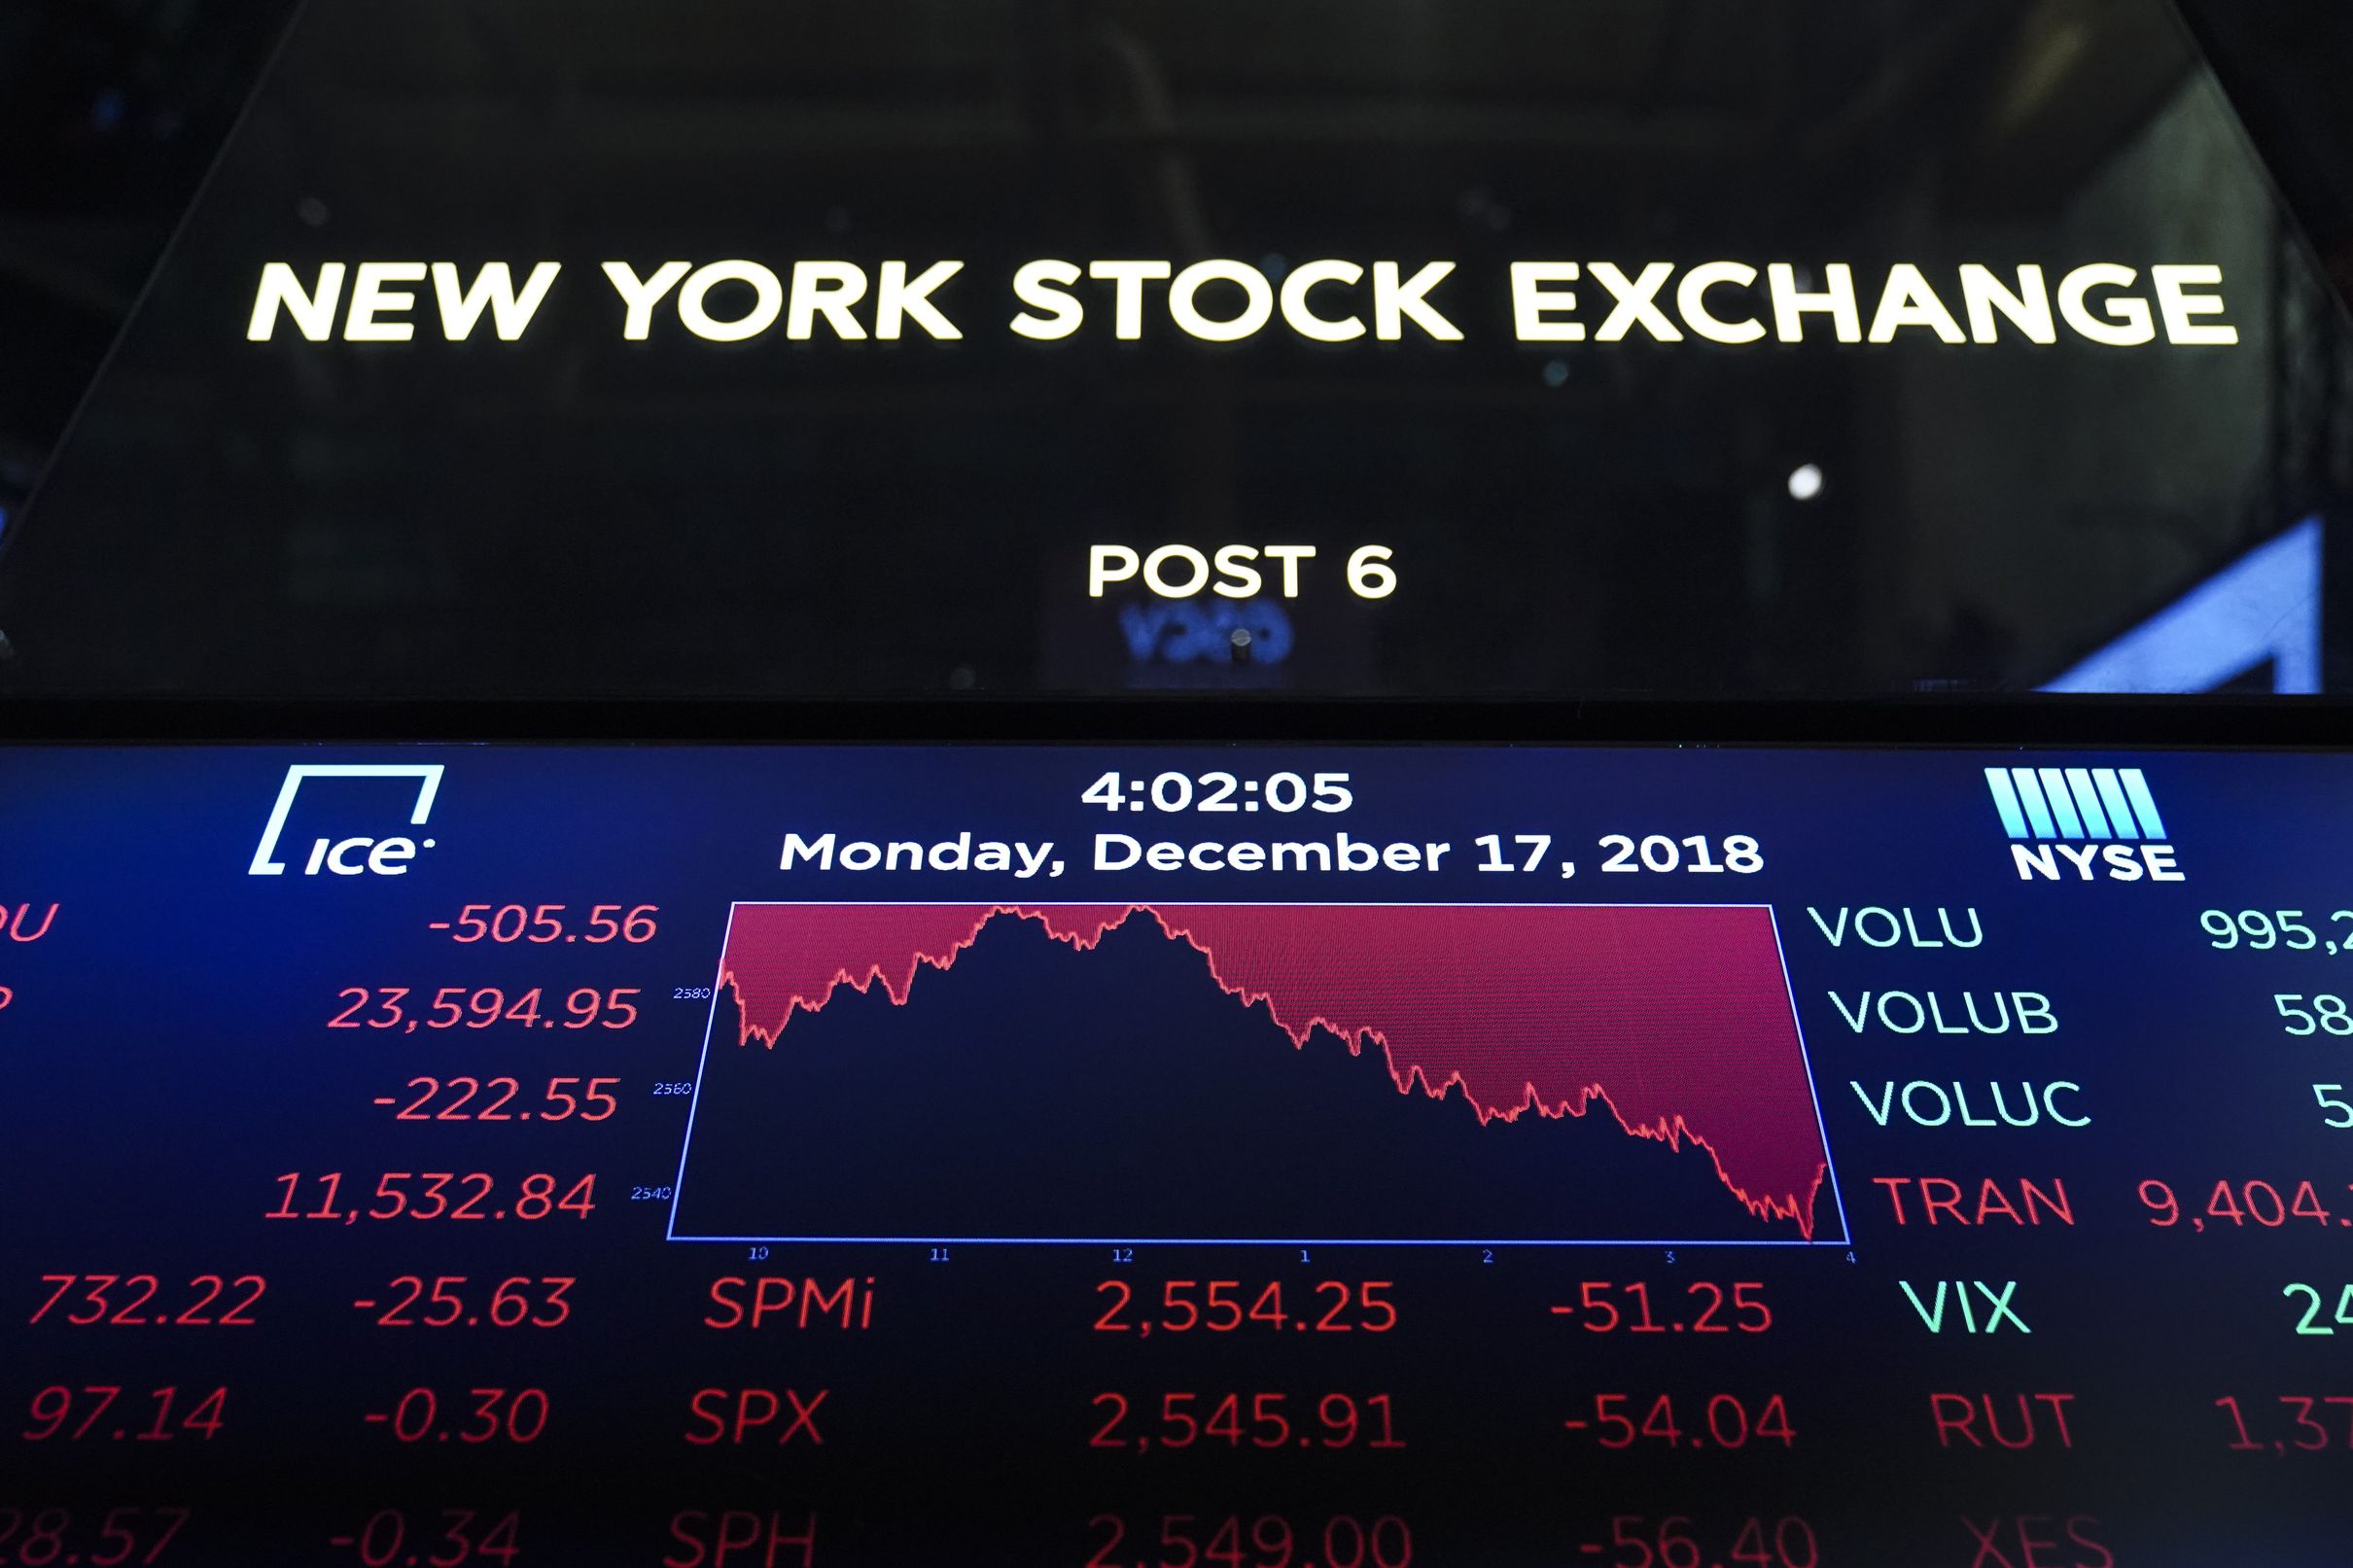 Why the stock market is down lately, explained - Vox